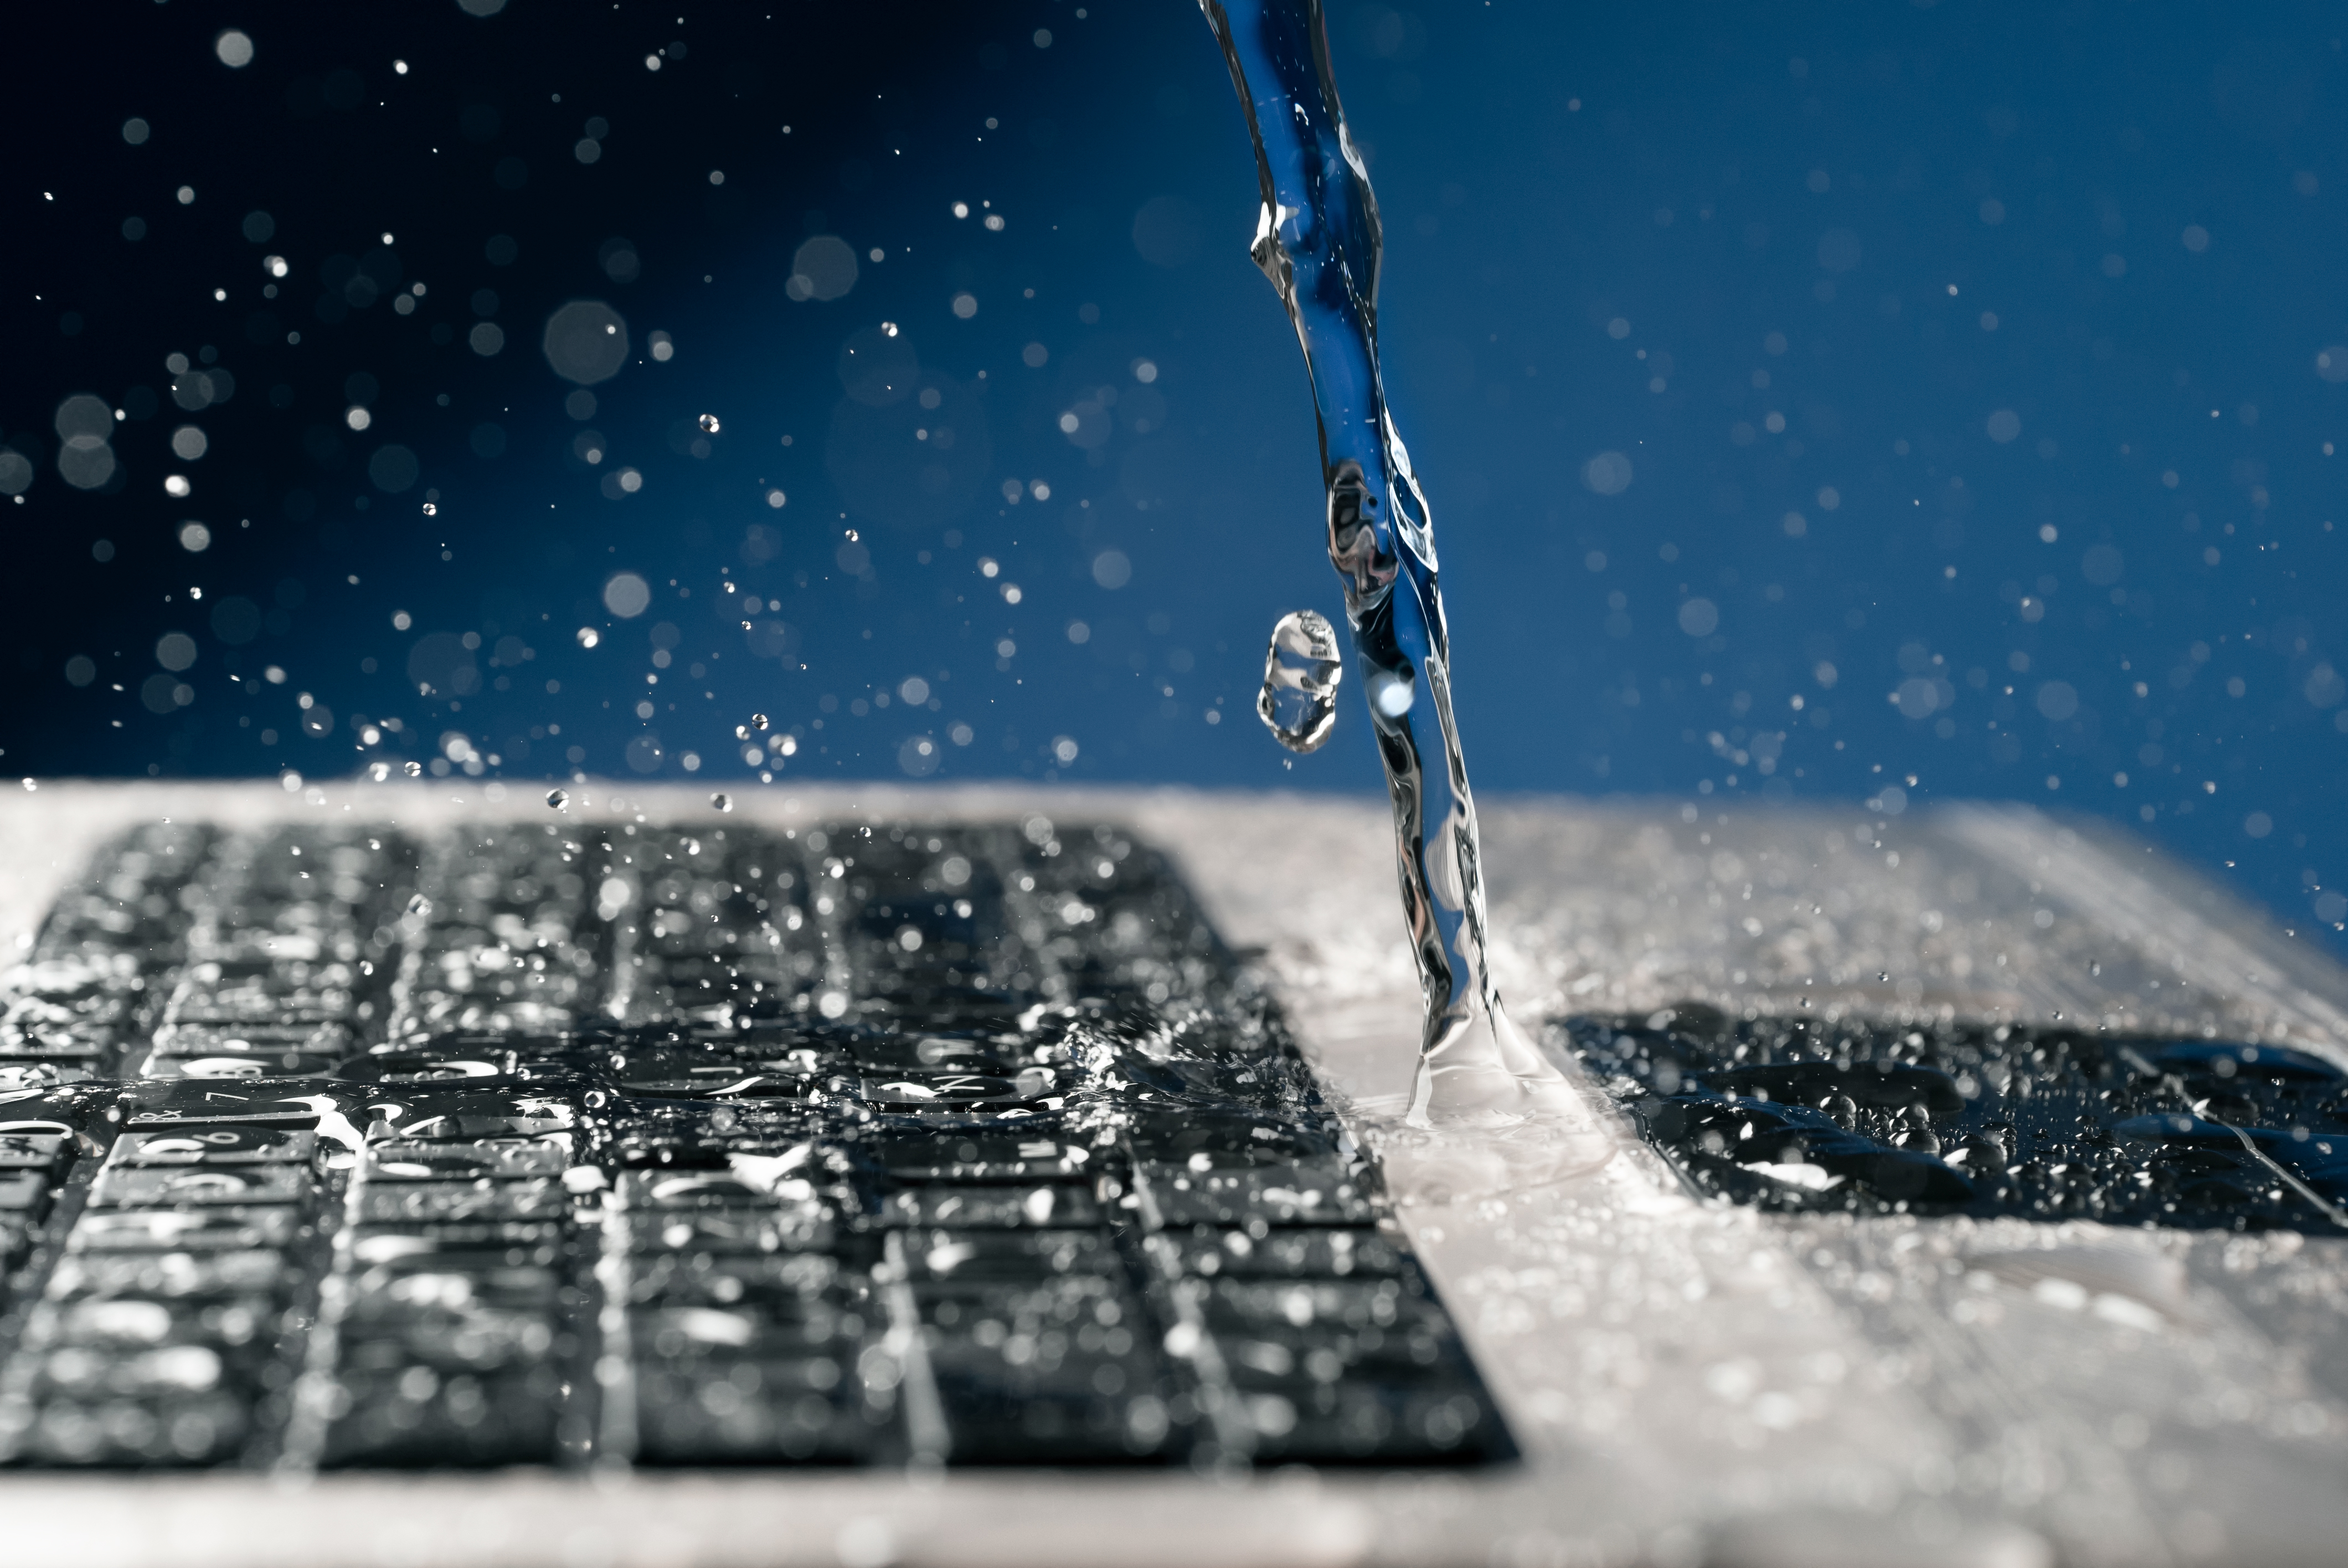 A stream of water pours on the laptop keyboard. | Source: Shutterstock